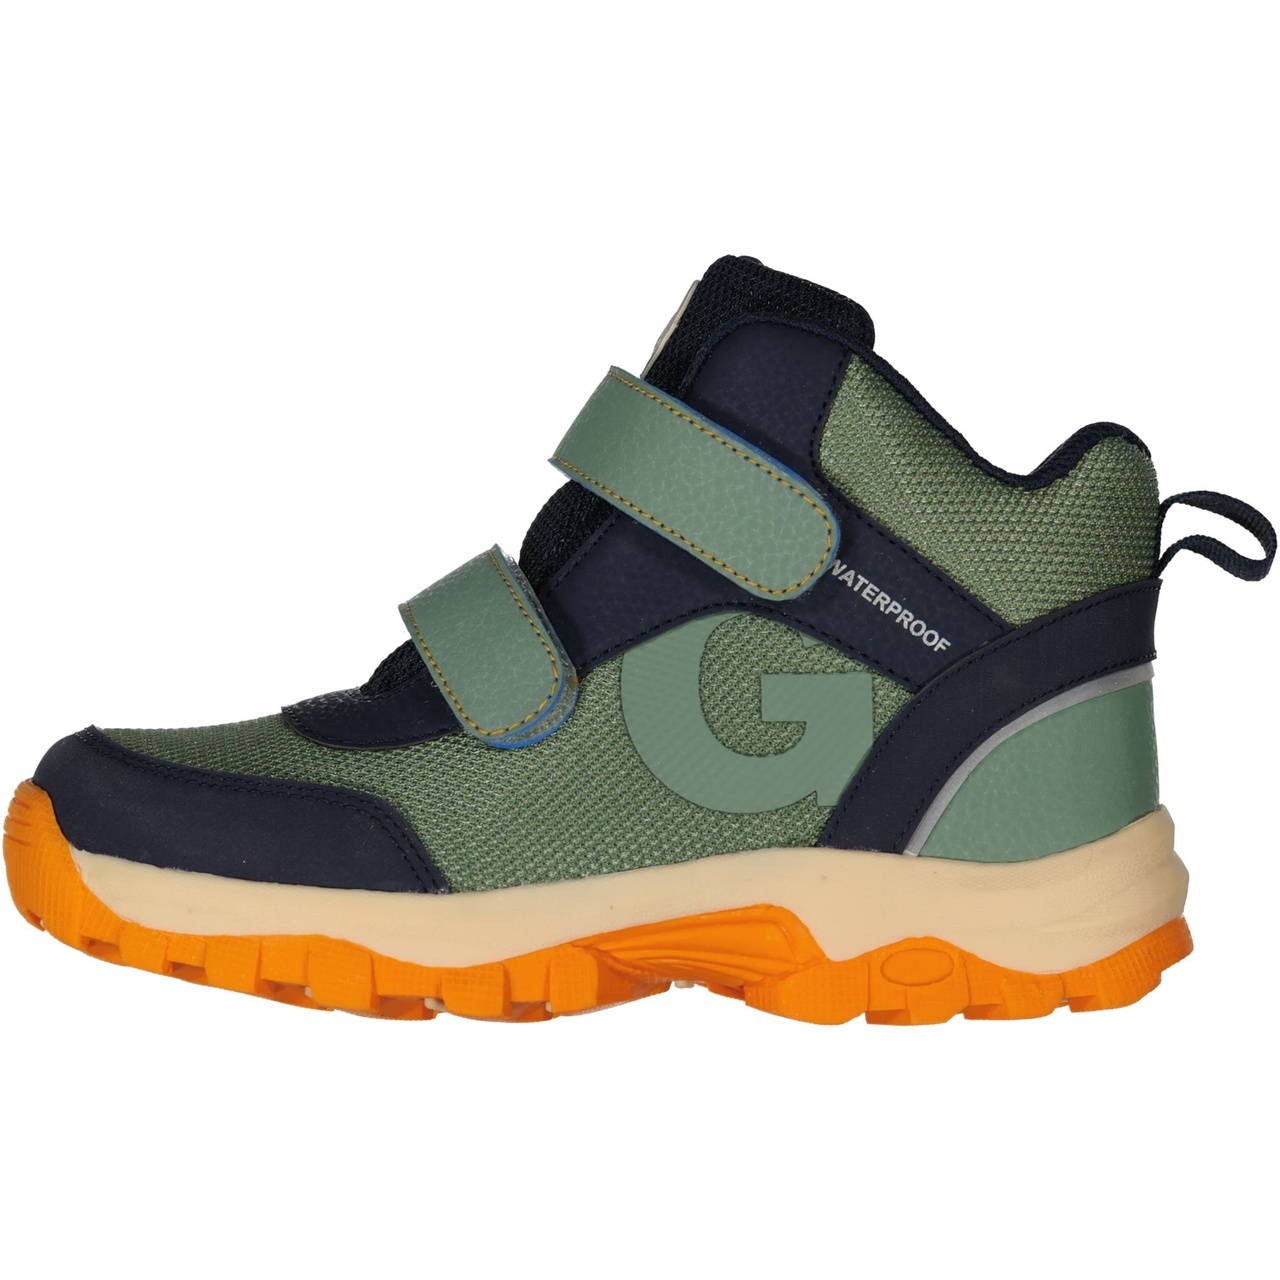 All weather shoes Moss green  33 (21,7 cm)